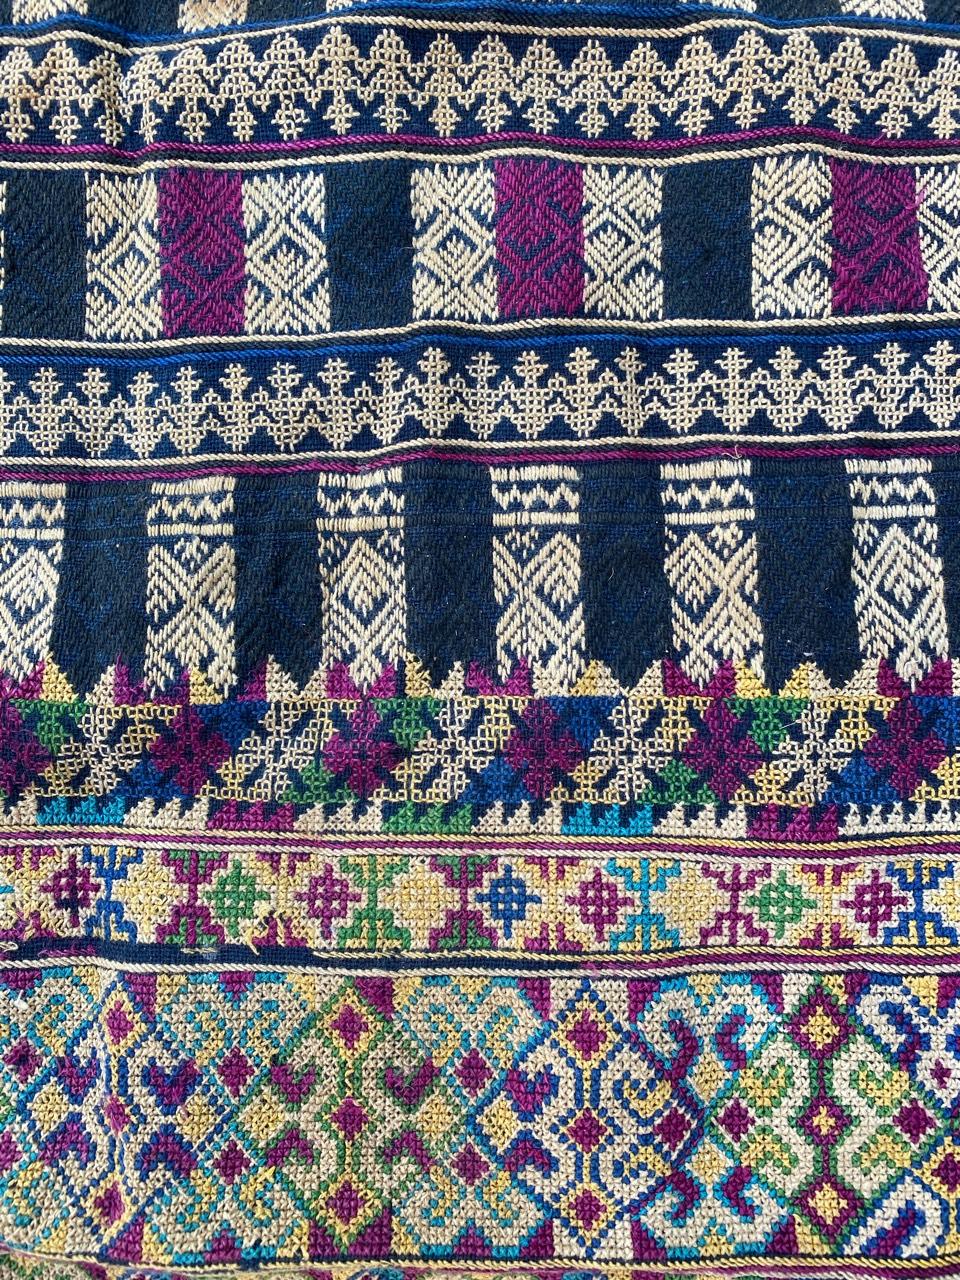 Embroidered Beautiful Little Antique Indonesian Embroidery For Sale